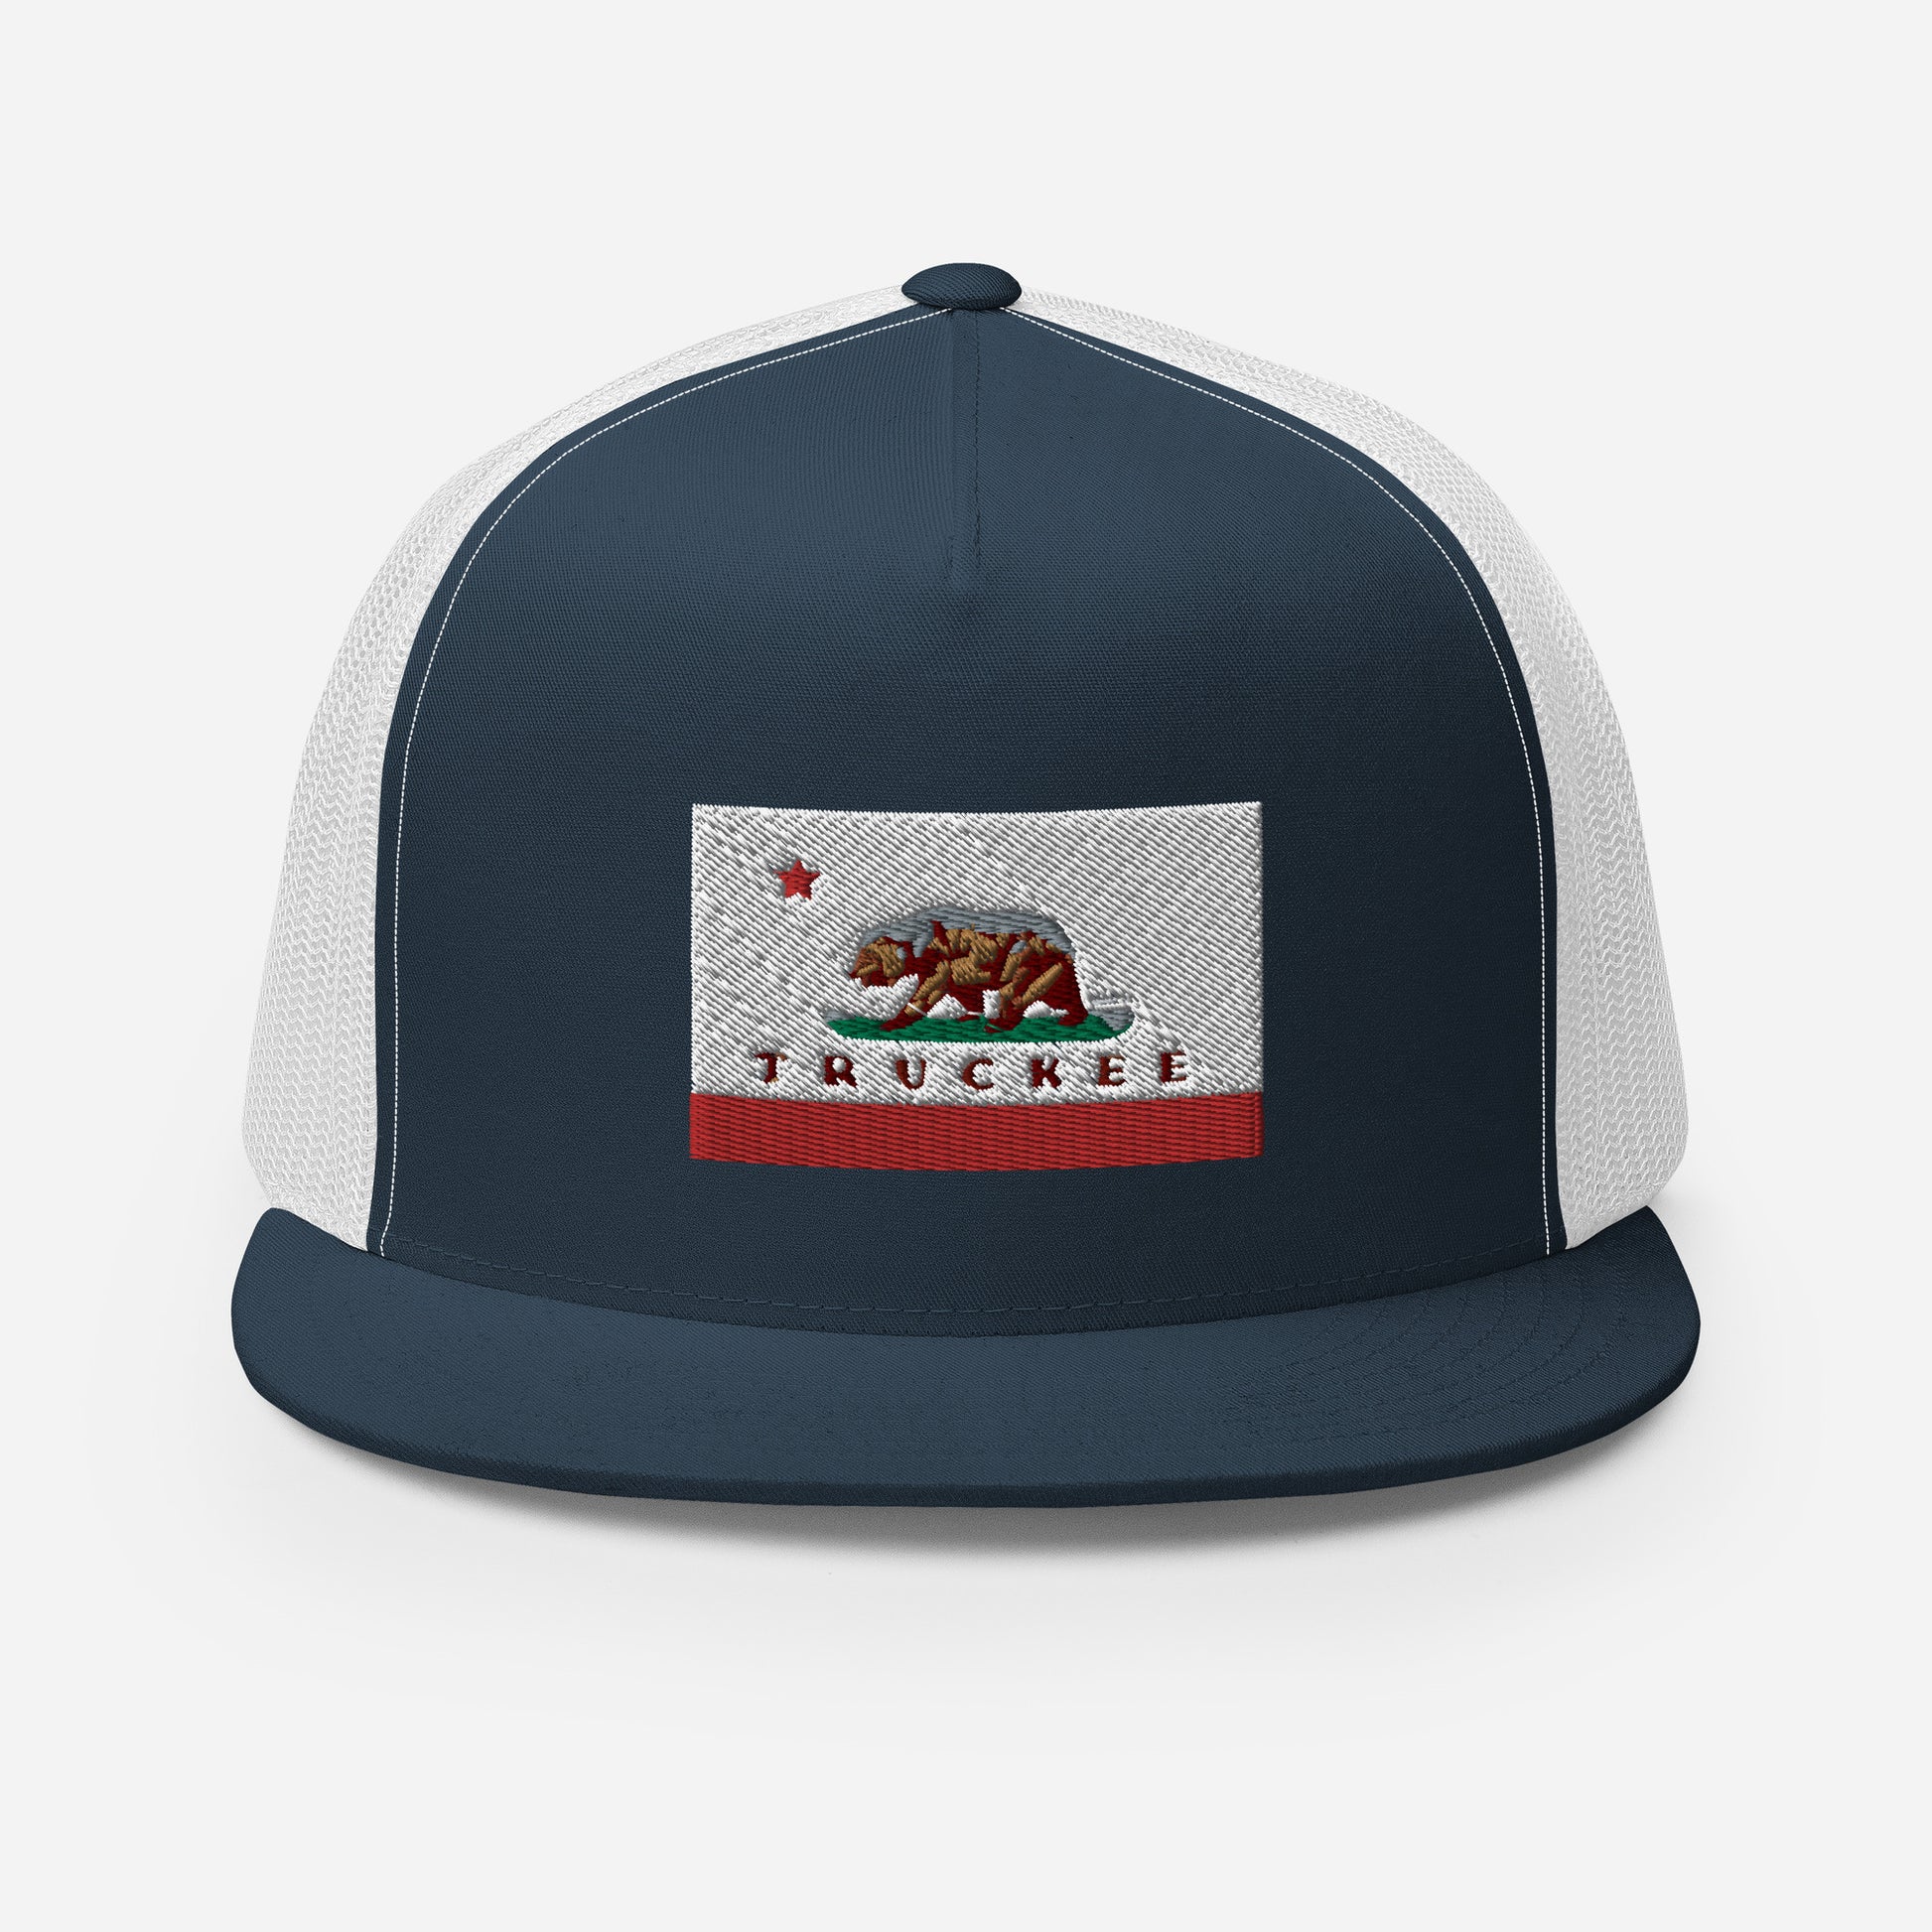 blue and white truckee snapbackat hat